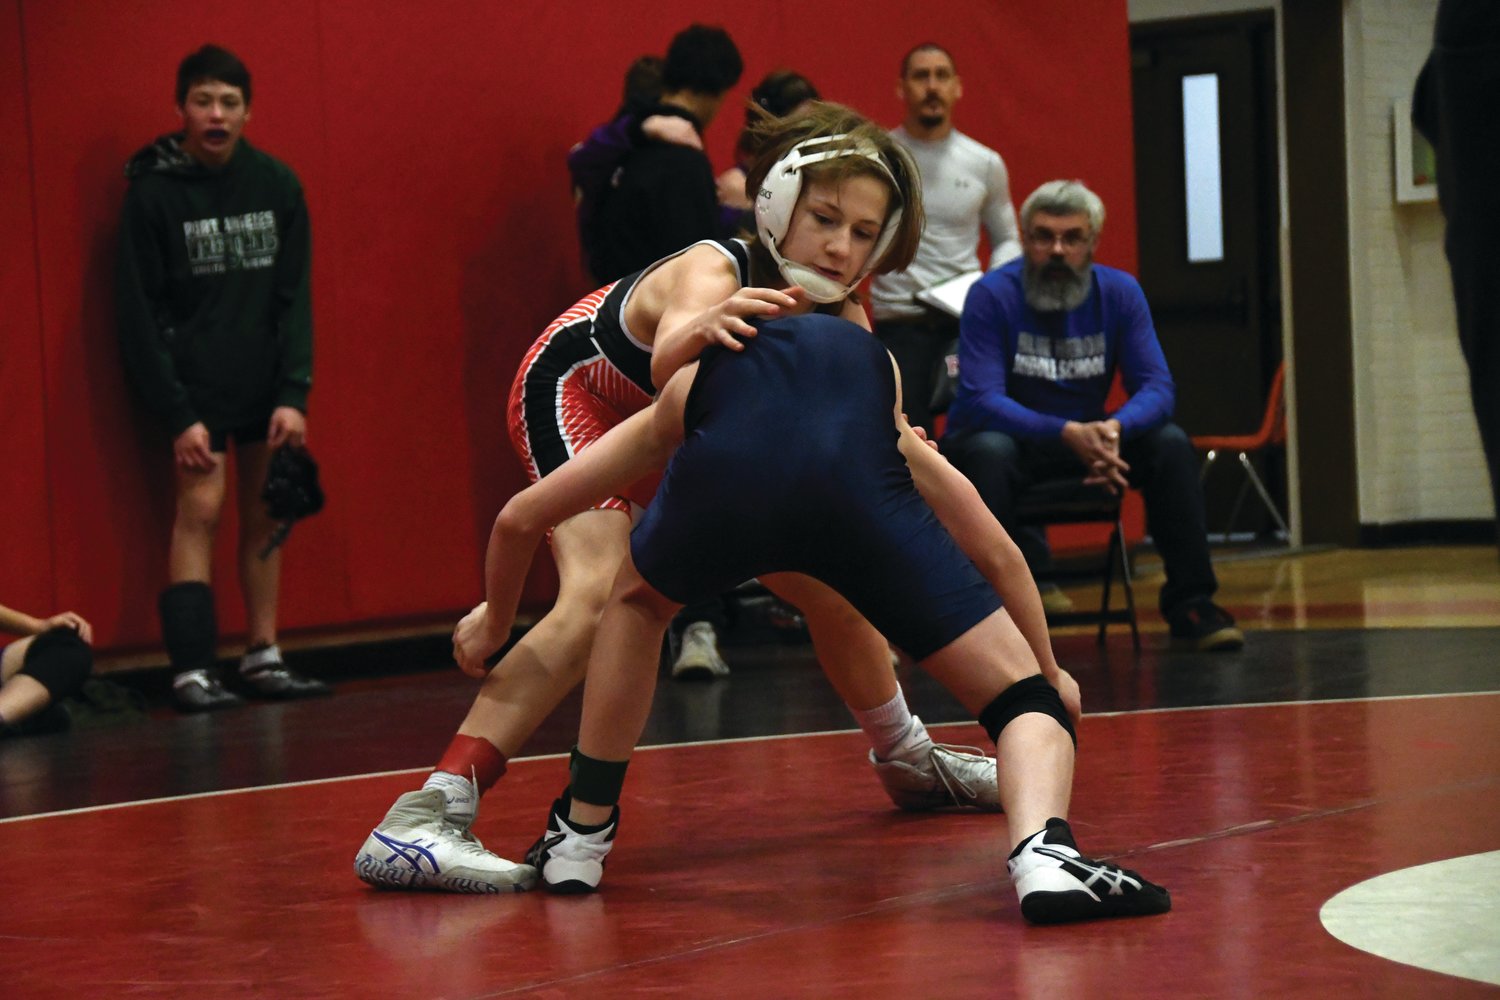 Chimacum eighth-grader Caleb Johnson tangles with his opponent as he looks for the takedown.